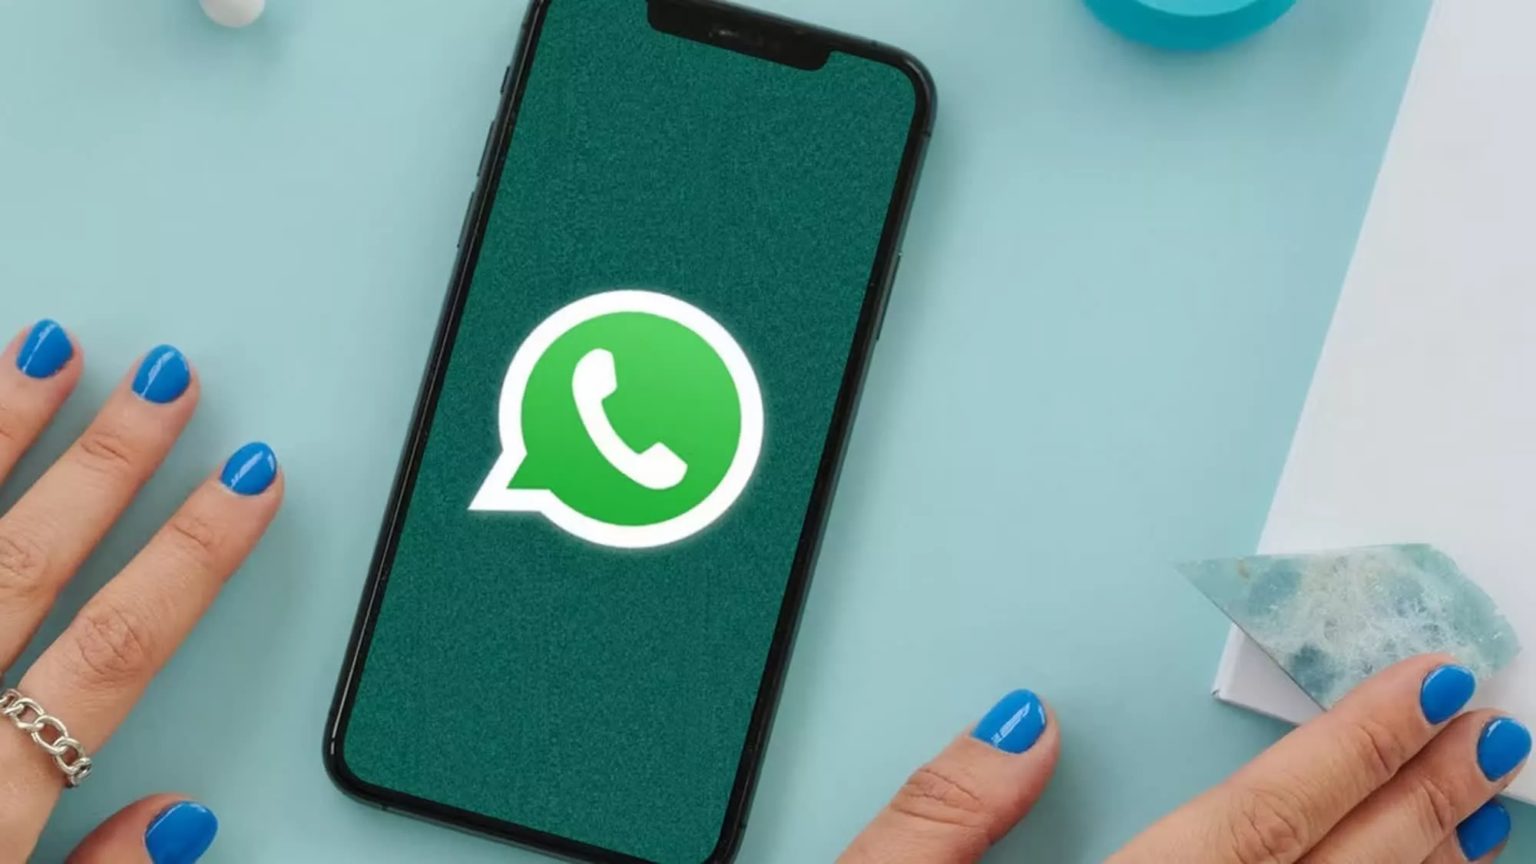 WhatsApp will soon introduce third-party chat support to comply with EU regulation